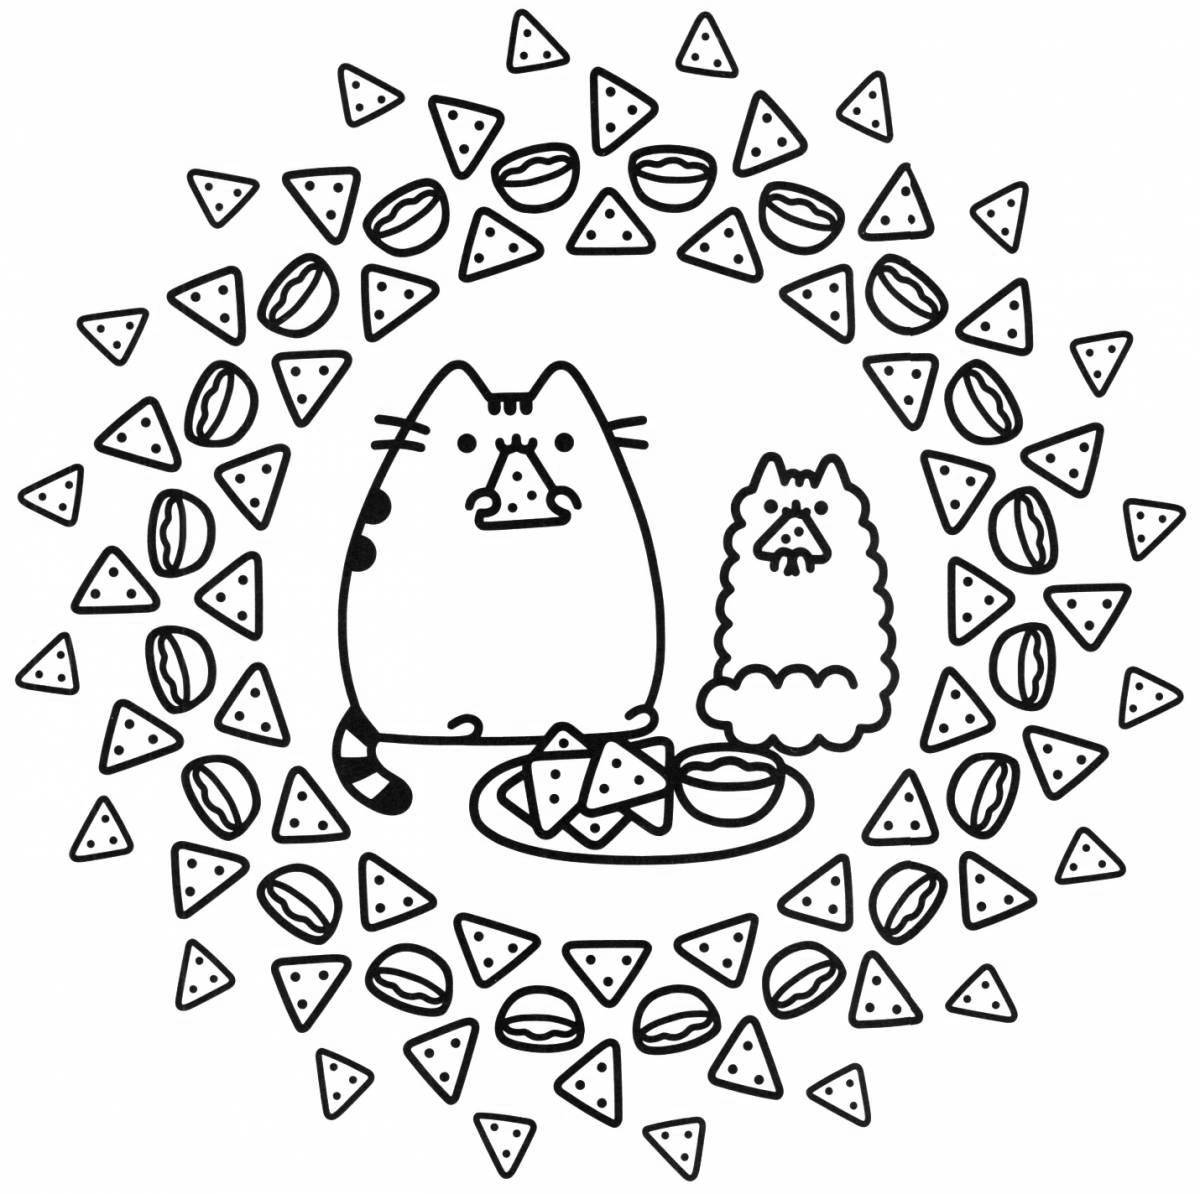 Coloring page fluffy cat Pusheen